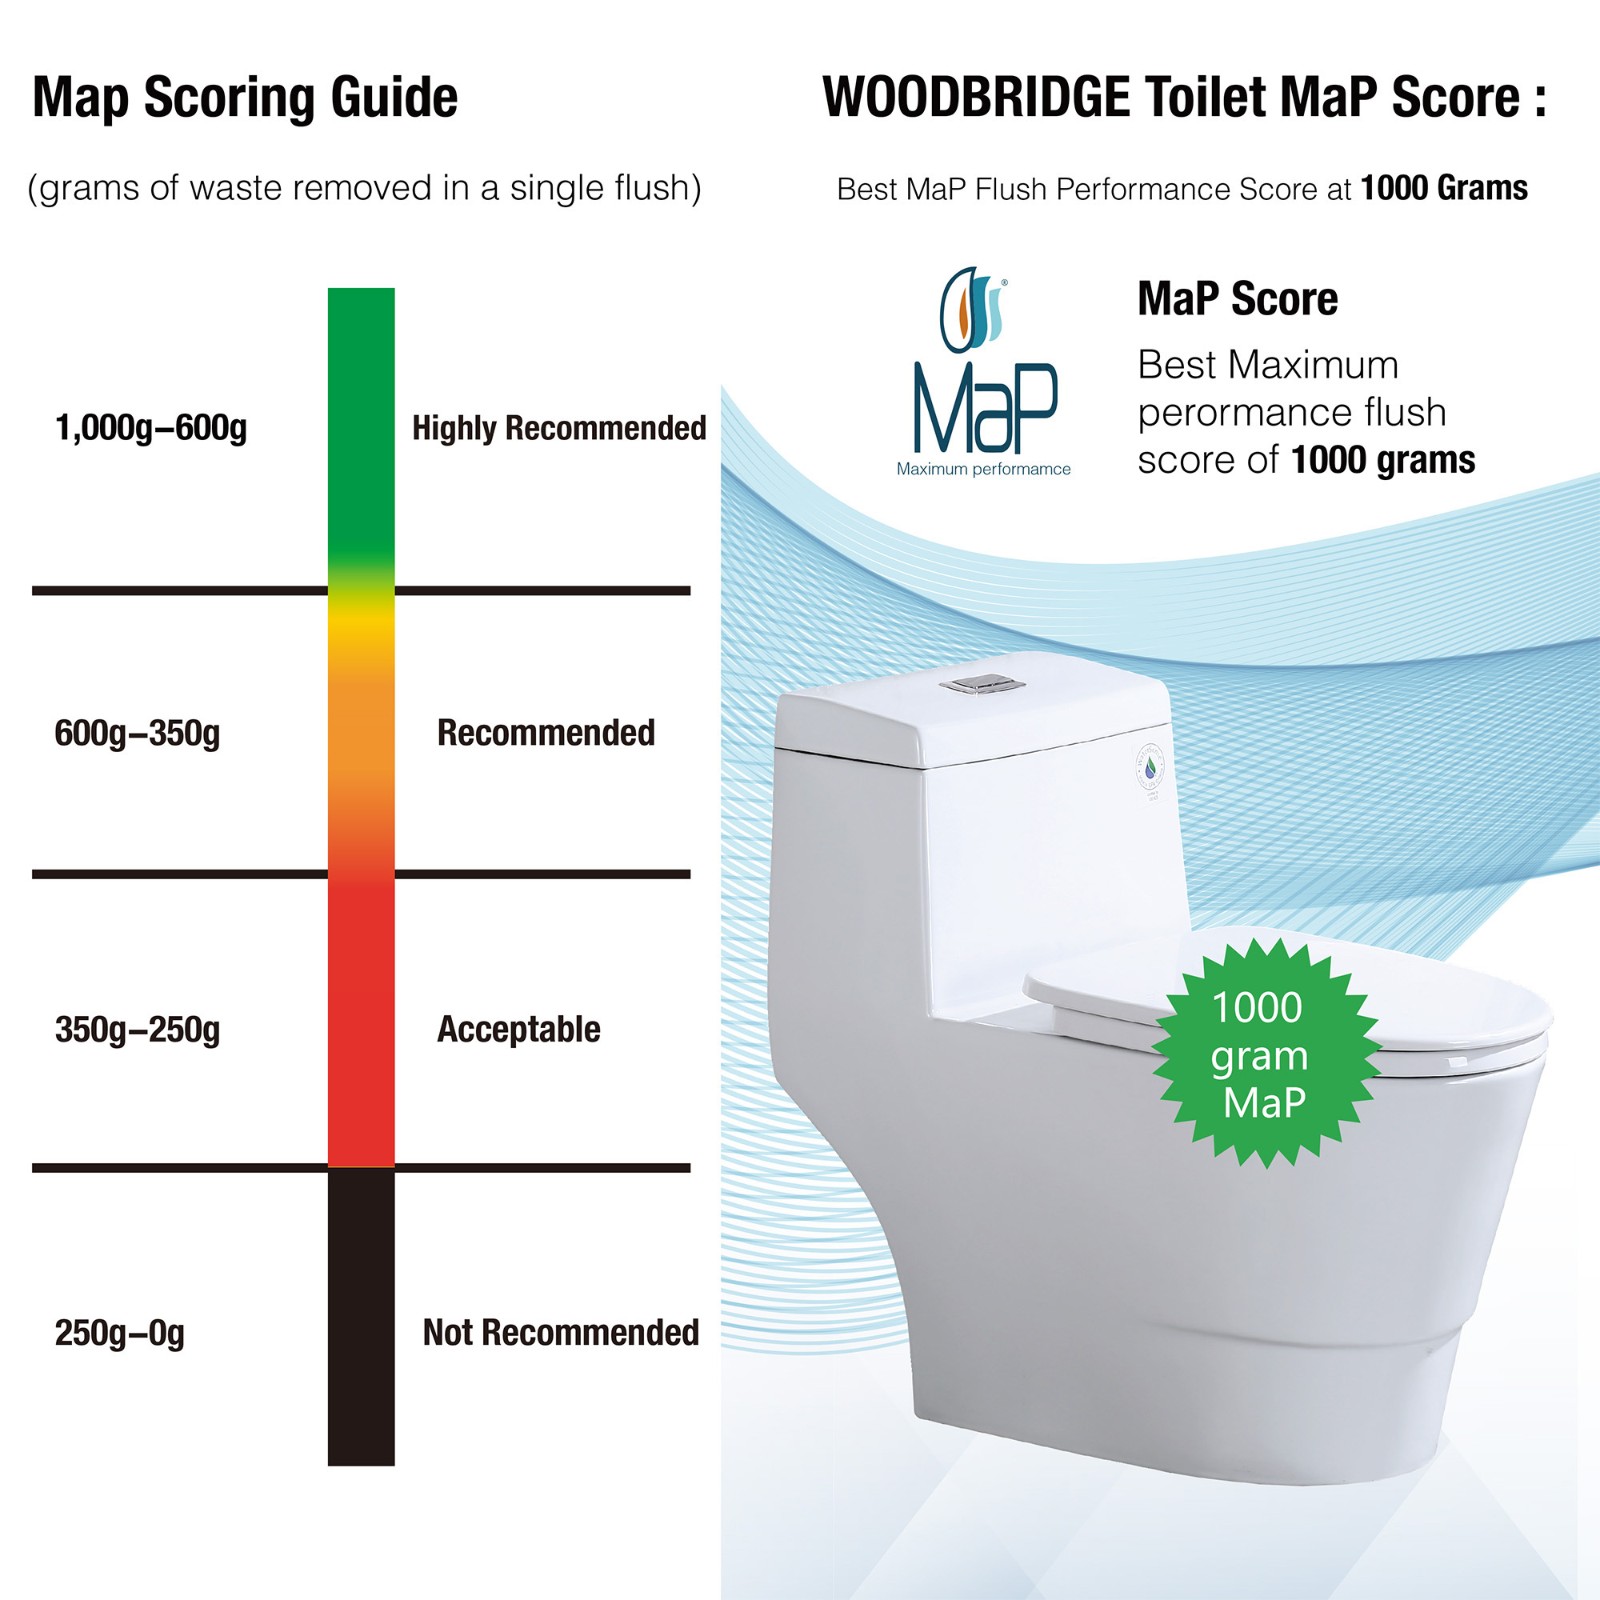  WOODBRIDGEE One Piece Toilet with Soft Closing Seat, Chair Height, 1.28 GPF Dual, Water Sensed, 1000 Gram MaP Flushing Score Toilet with Brushed Nickel Button T0001-BN, White_5726